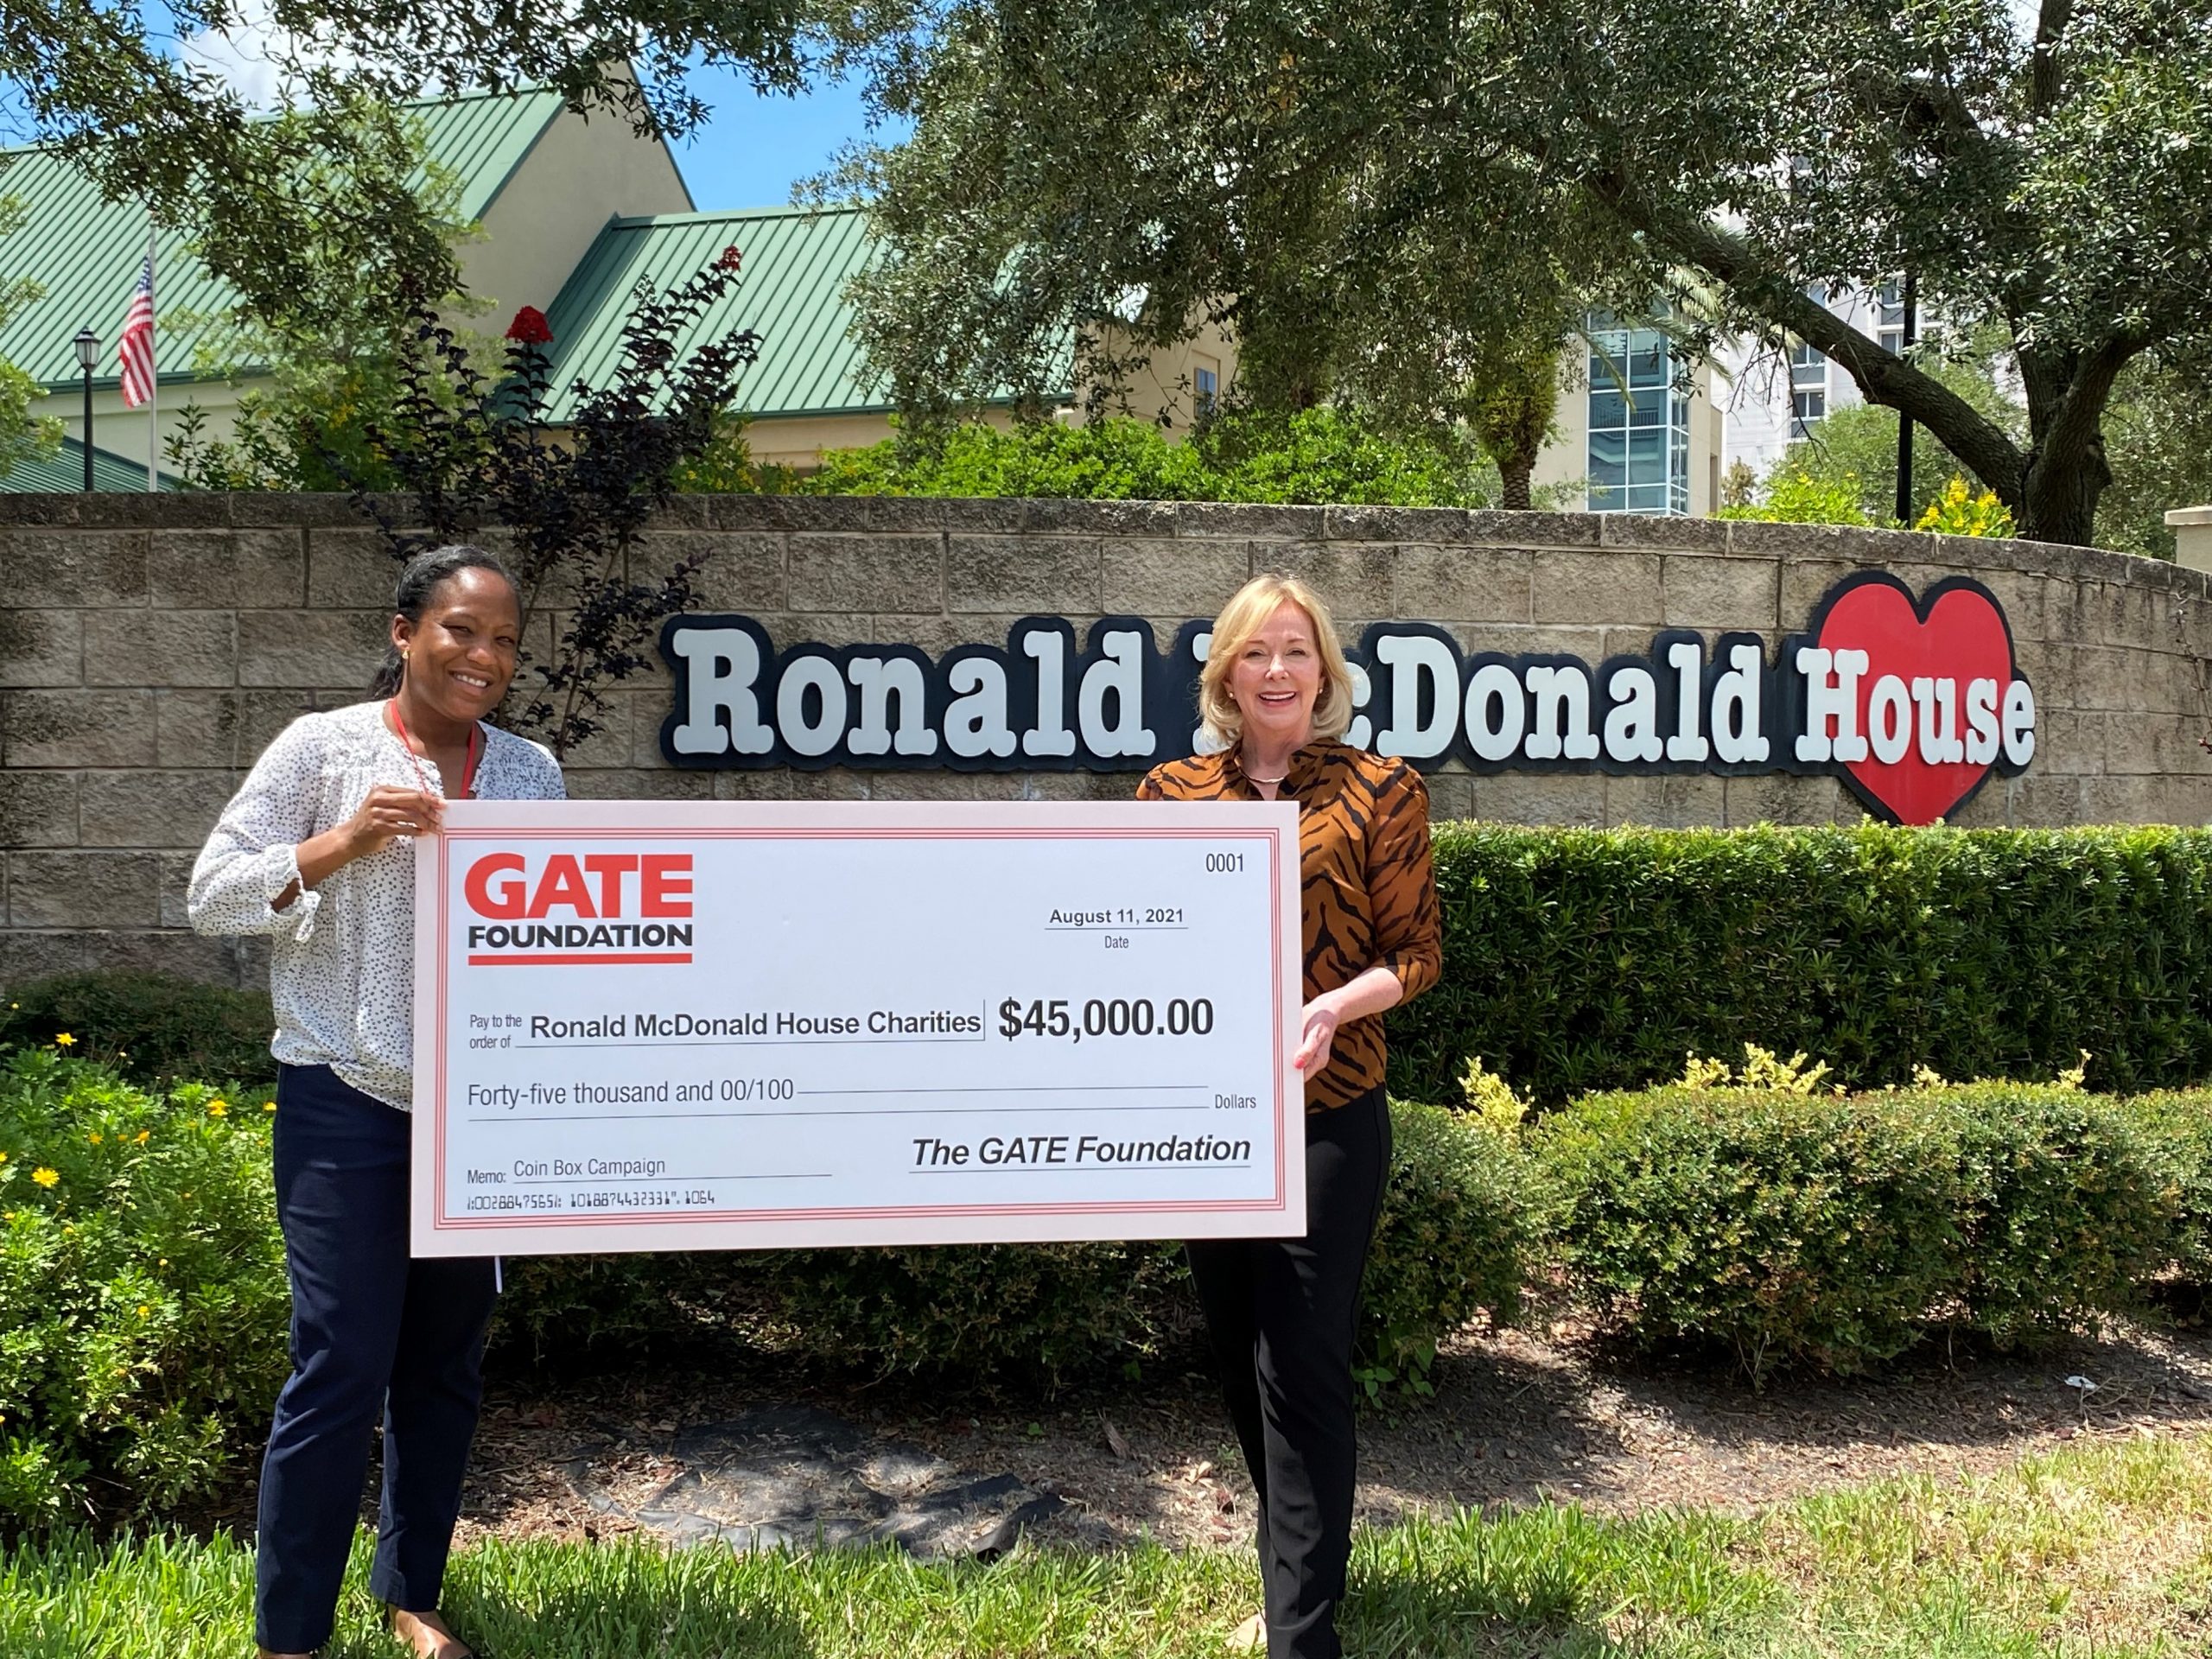 GATE Stores raise $45,000 for Ronald McDonald House Charities